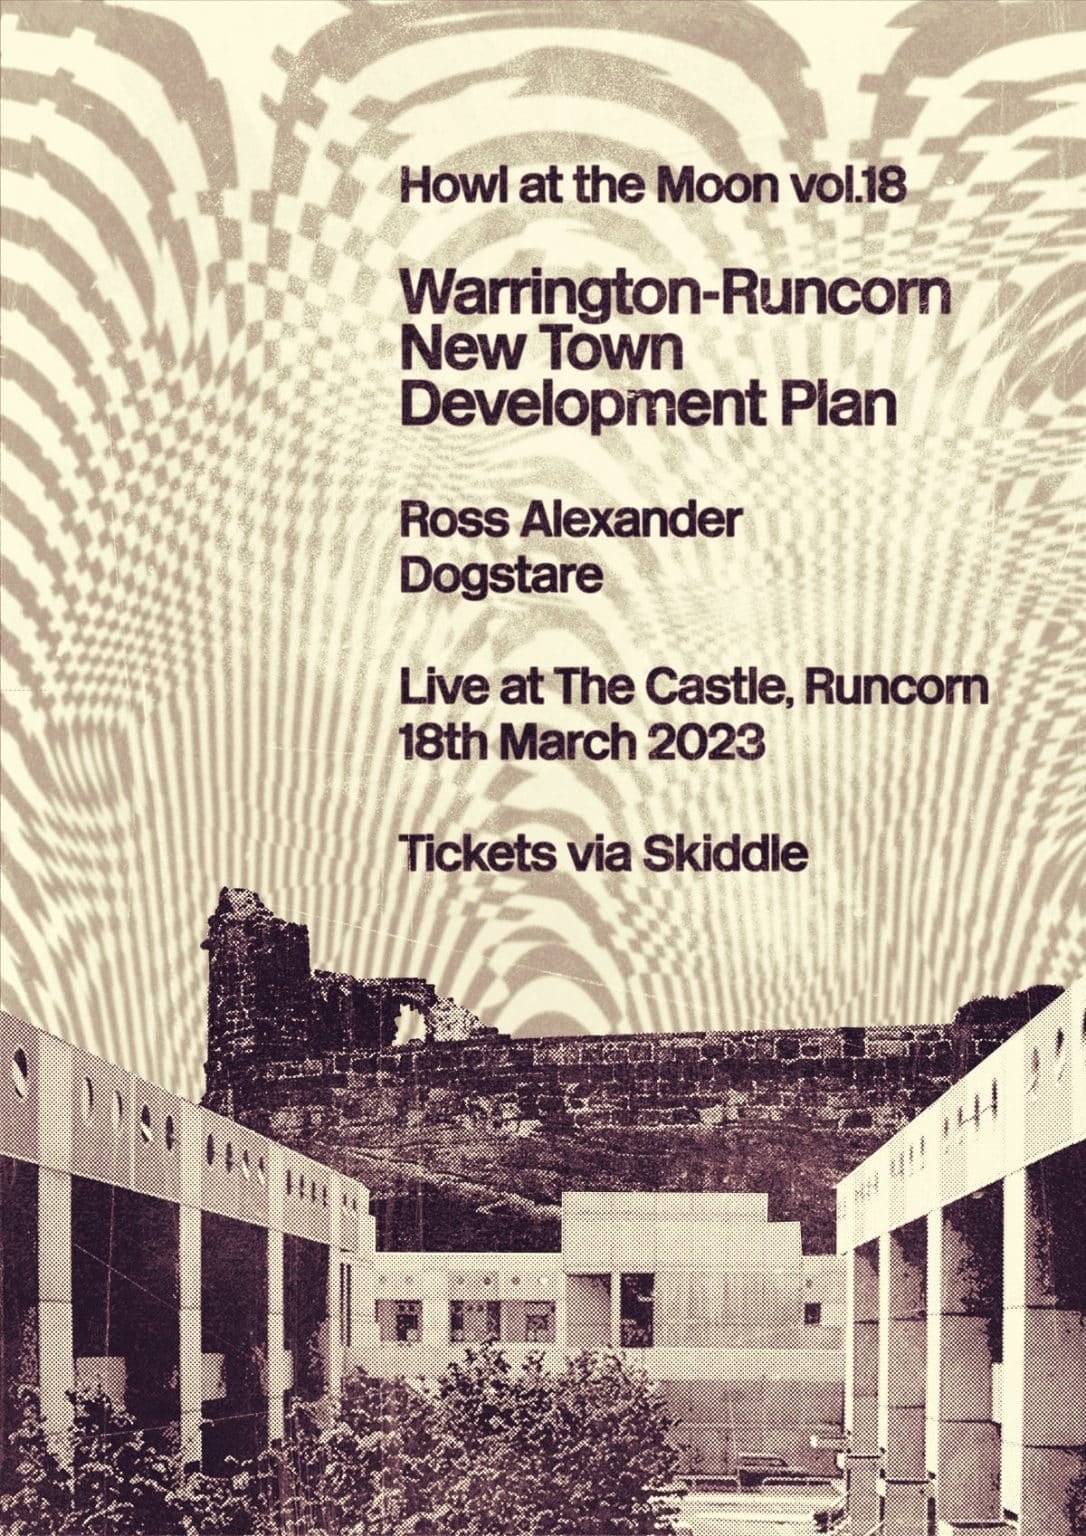 Poster for the gig at Runcorn Castle